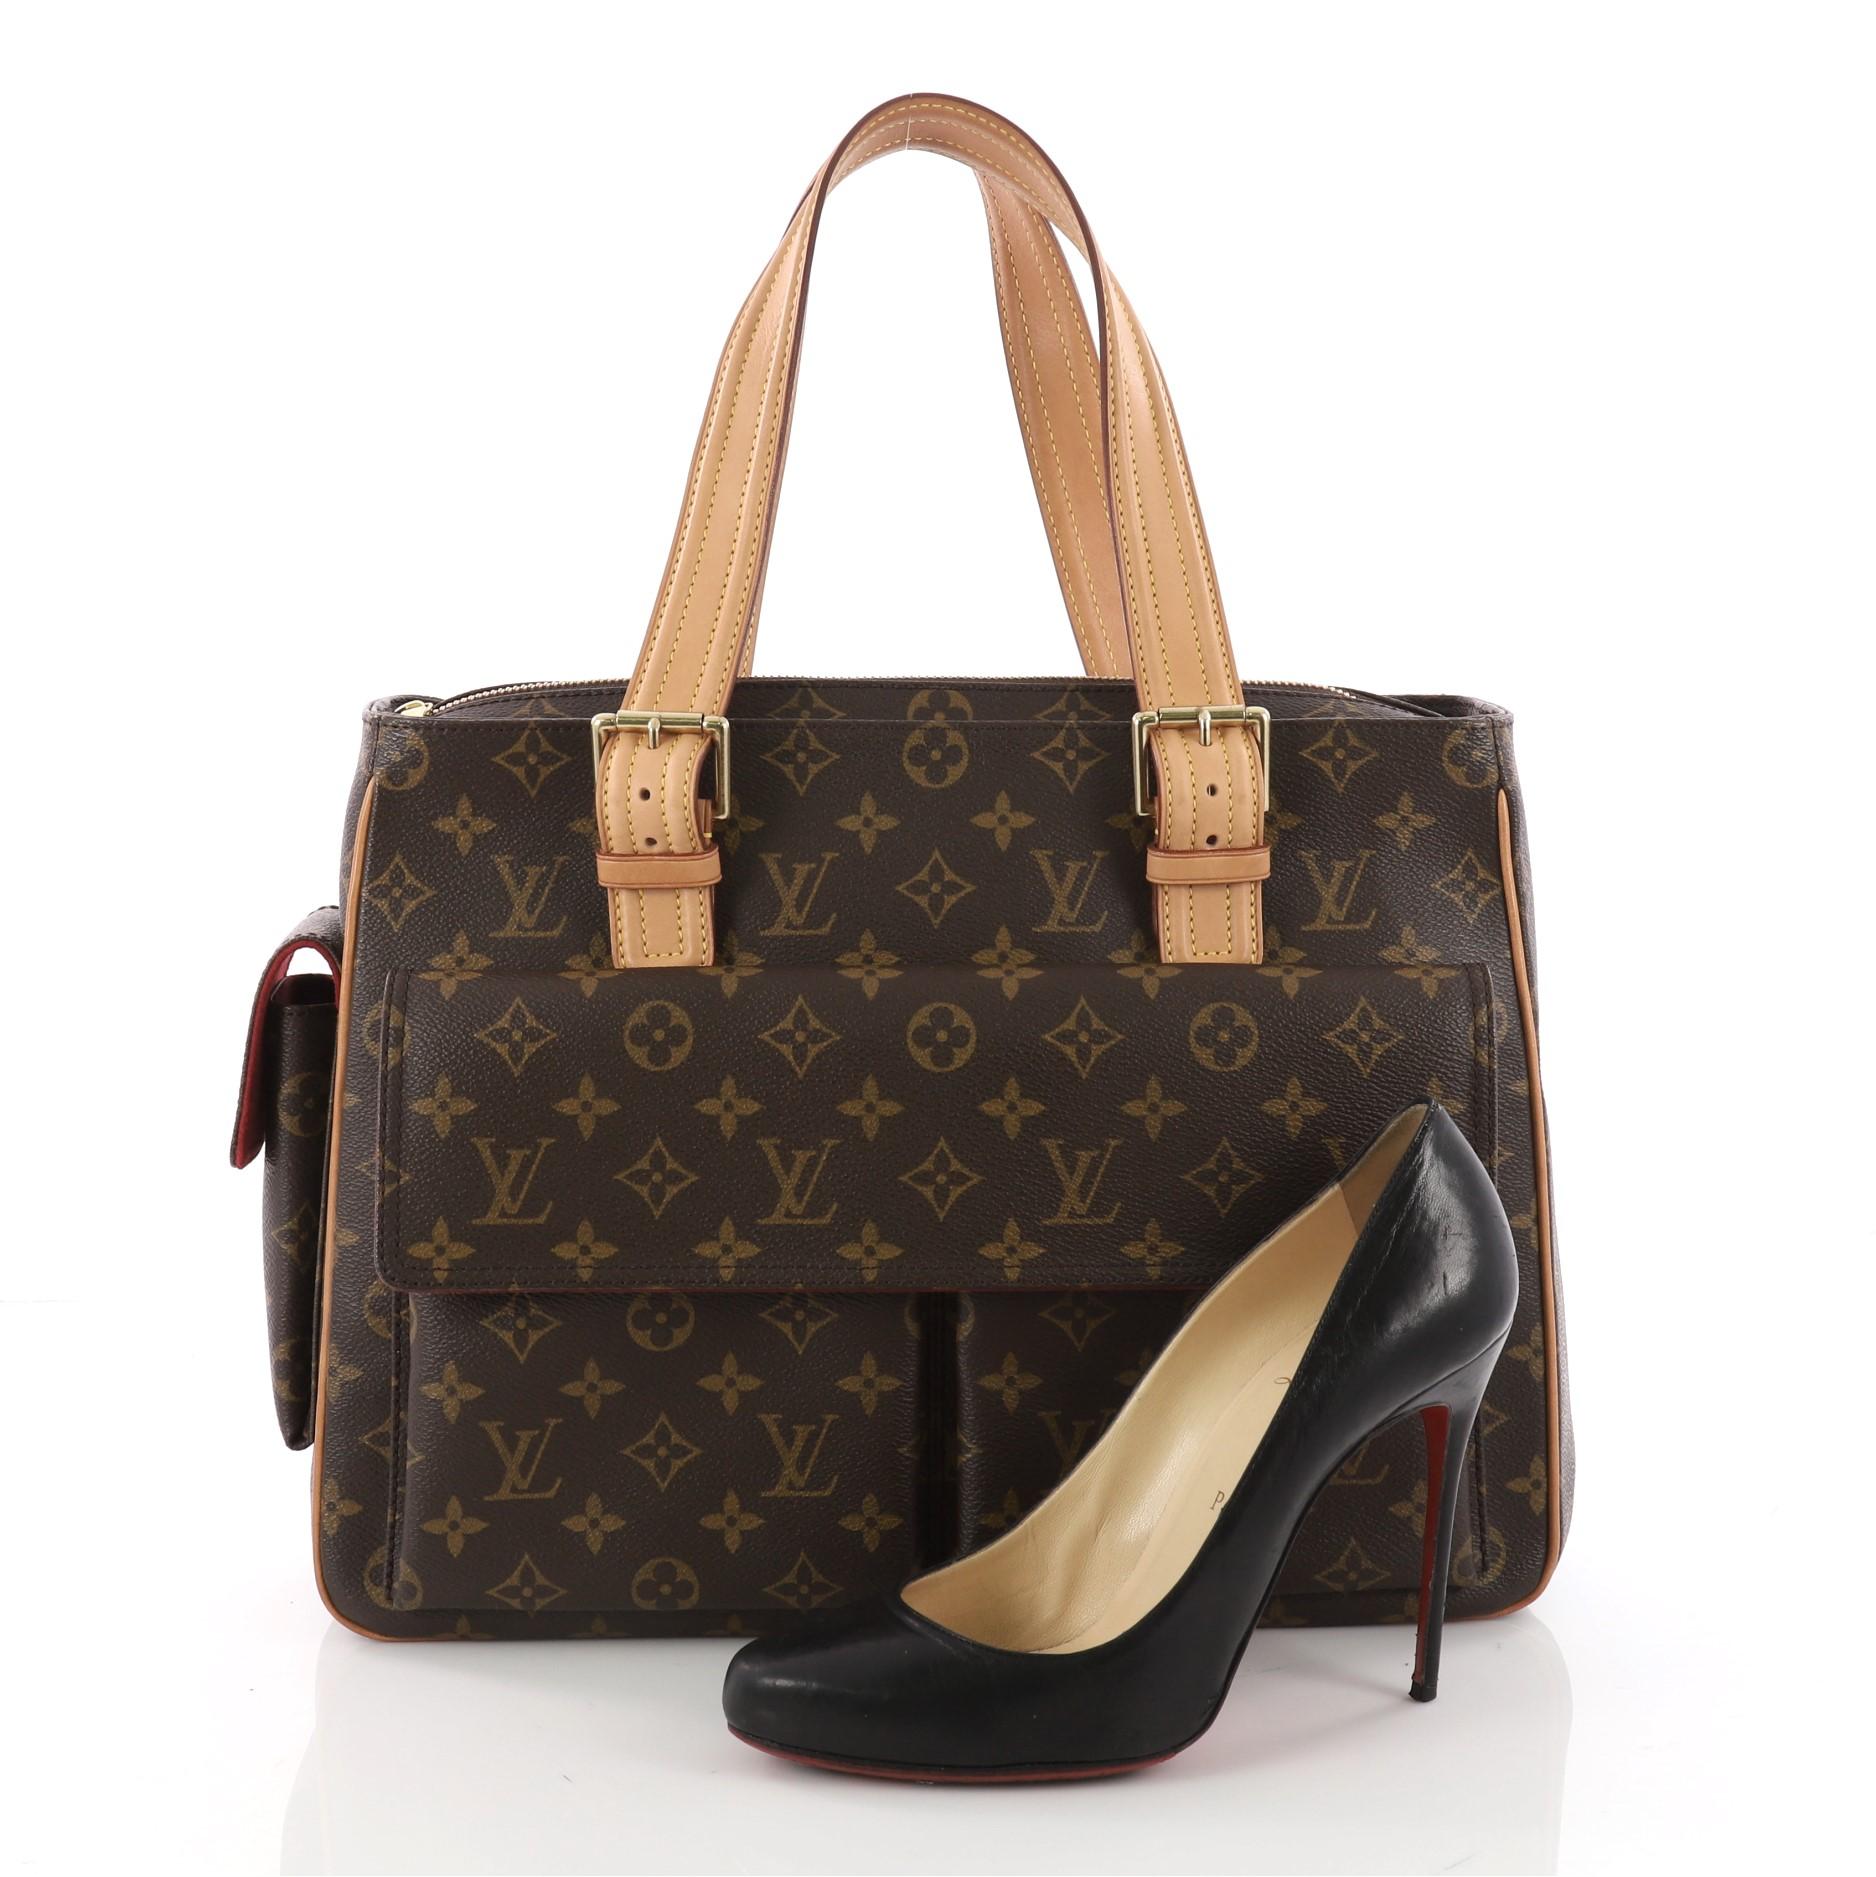 This authentic Louis Vuitton Multipli Cite Handbag Monogram Canvas showcases a simple design made for everyday use. Crafted from Louis Vuitton's iconic brown monogram coated canvas, this tote features dual flat vachetta leather straps with buckle